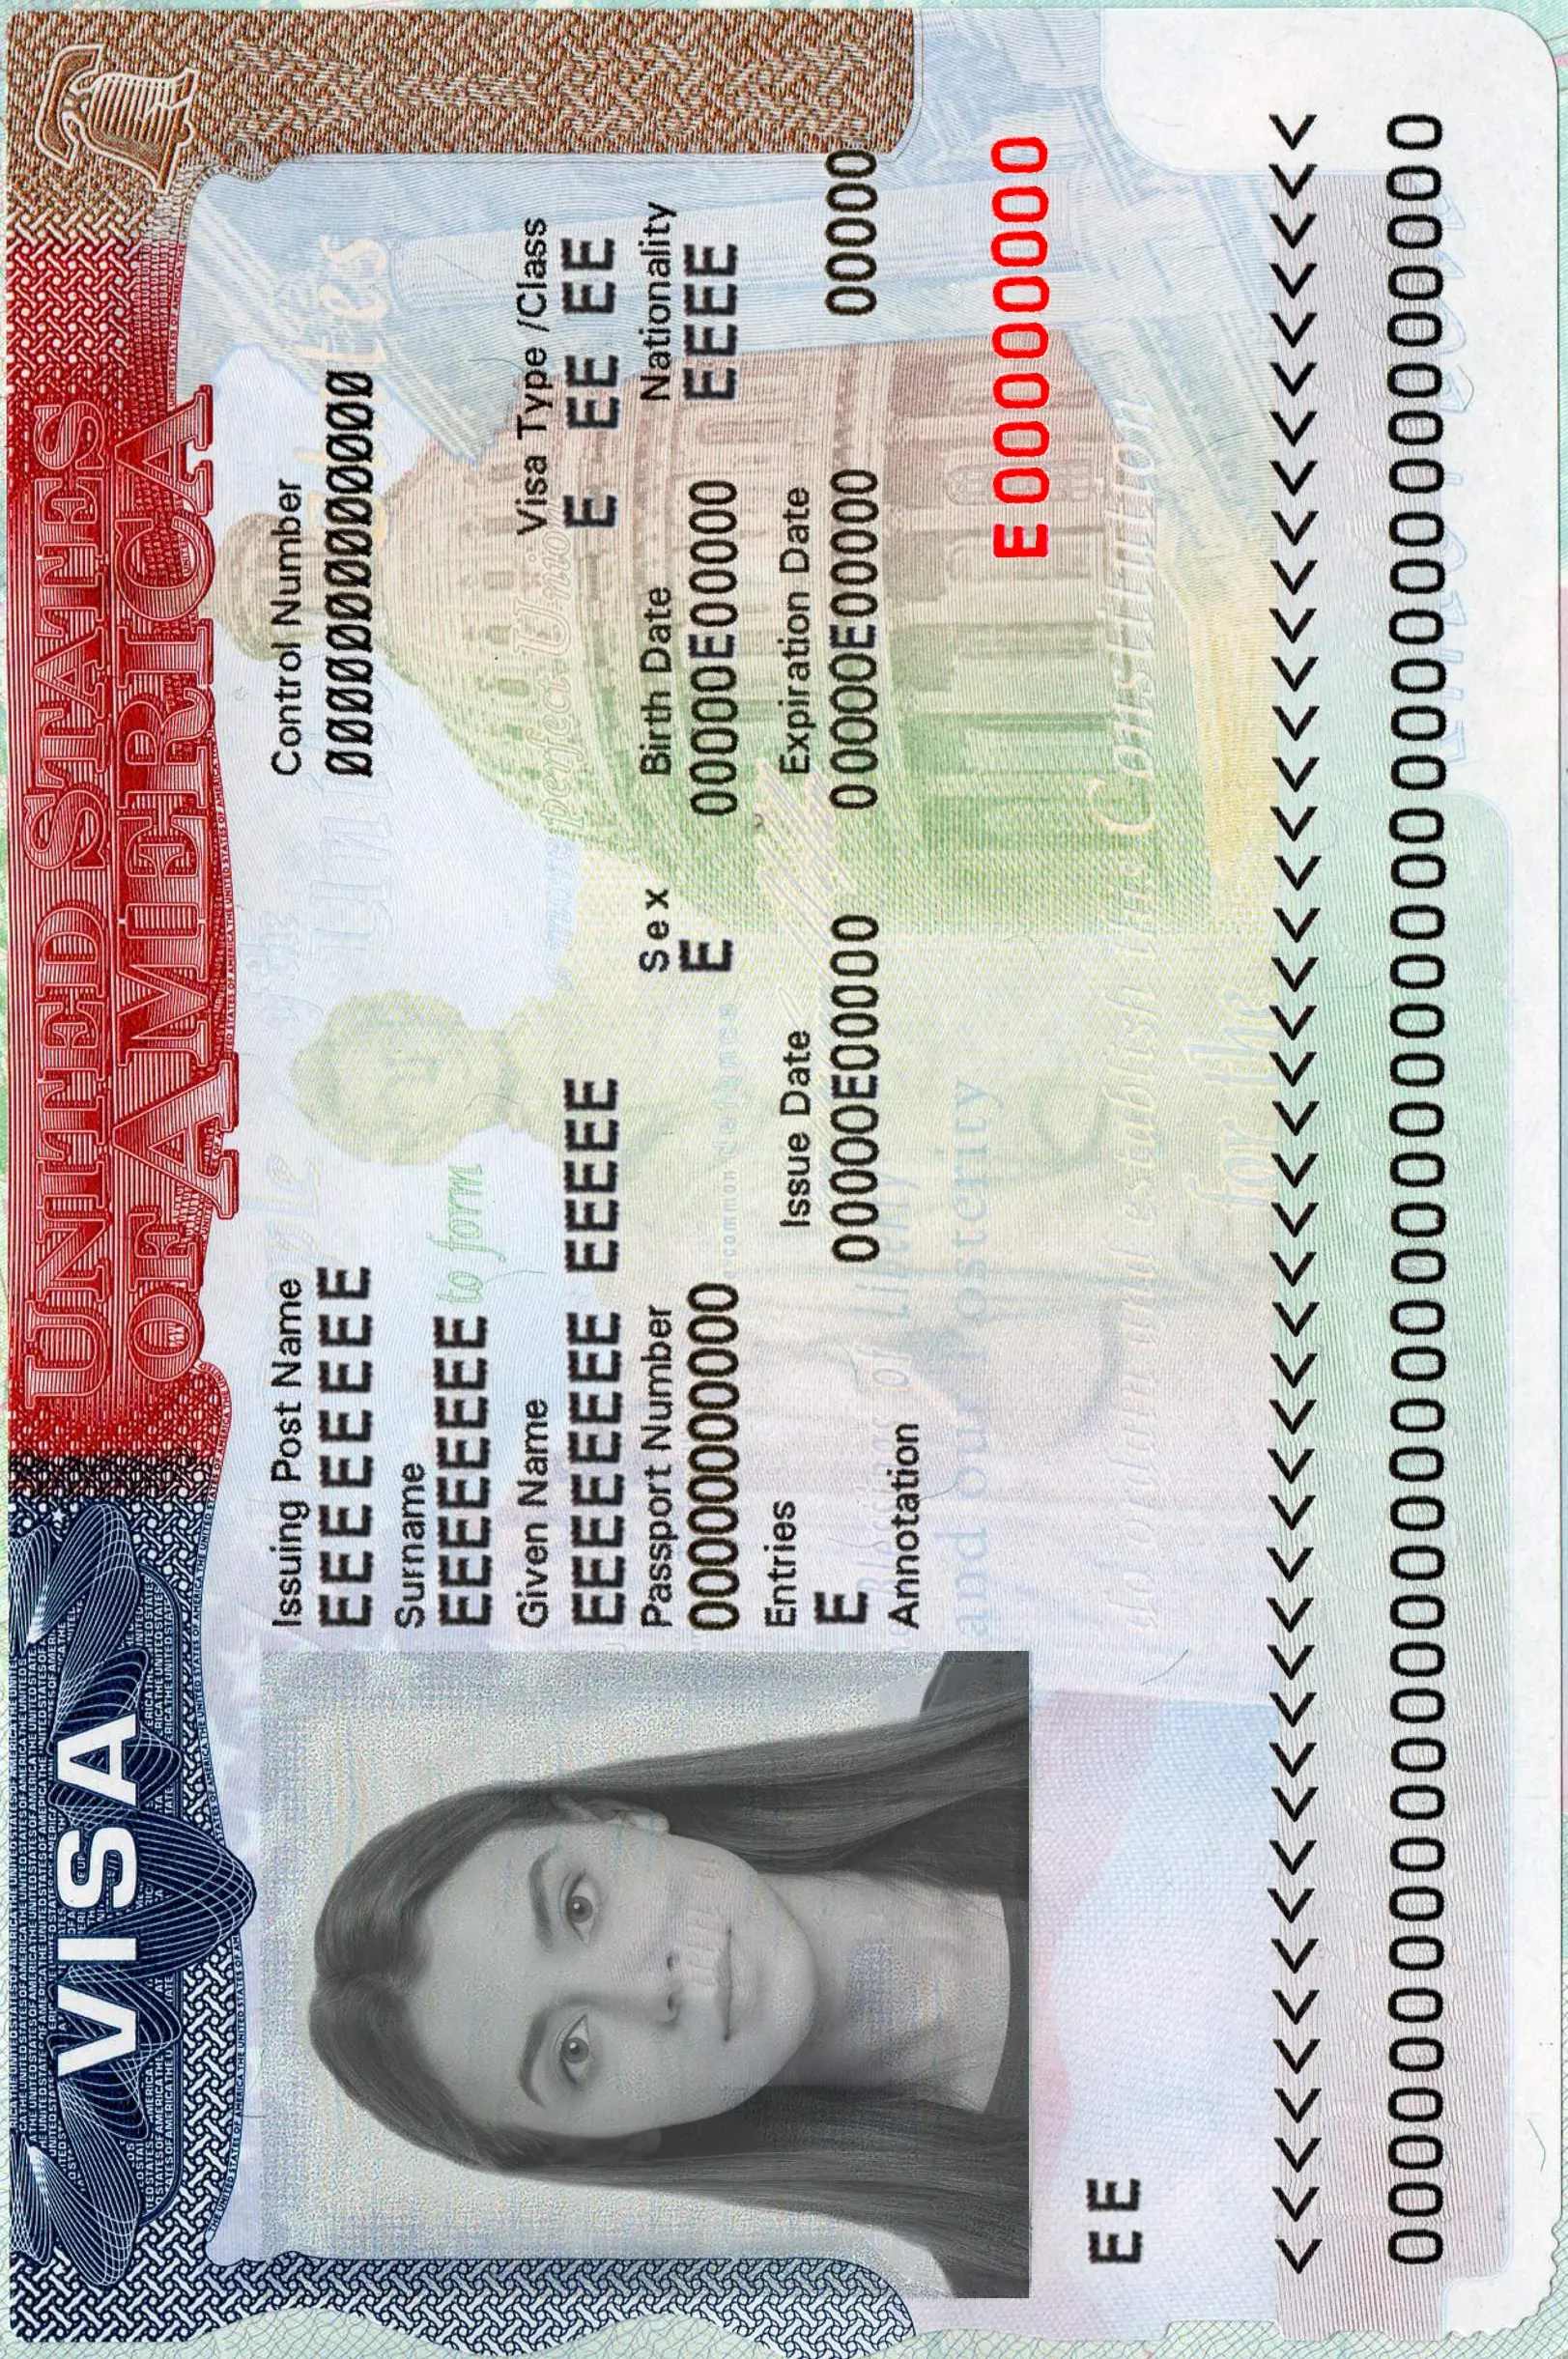 The United States Visa 2x2 Inches (51x51 MM)